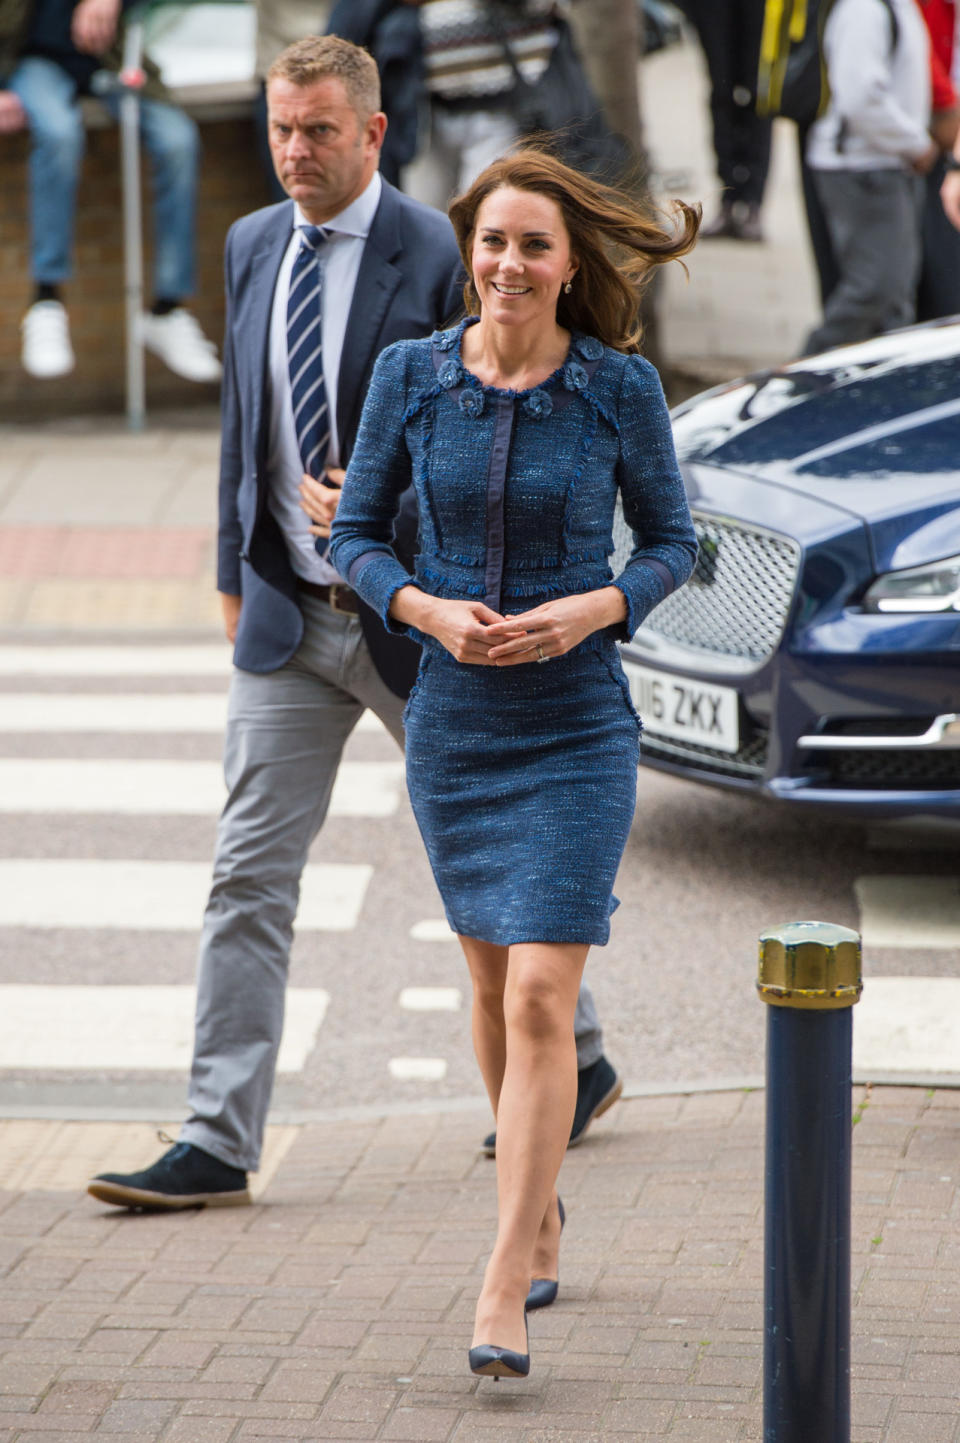 <p>The Duchess visited the survivors of the tragic London terror attack in hospital. She went for an understated workwear look to speak to both the victims and hospital staff, choosing a blue tweed skirt suit by Rebecca Taylor. Studded navy heels by Manolo Blahnik finished off the smart ensemble.</p><p><i>[Photo: PA]</i> </p>